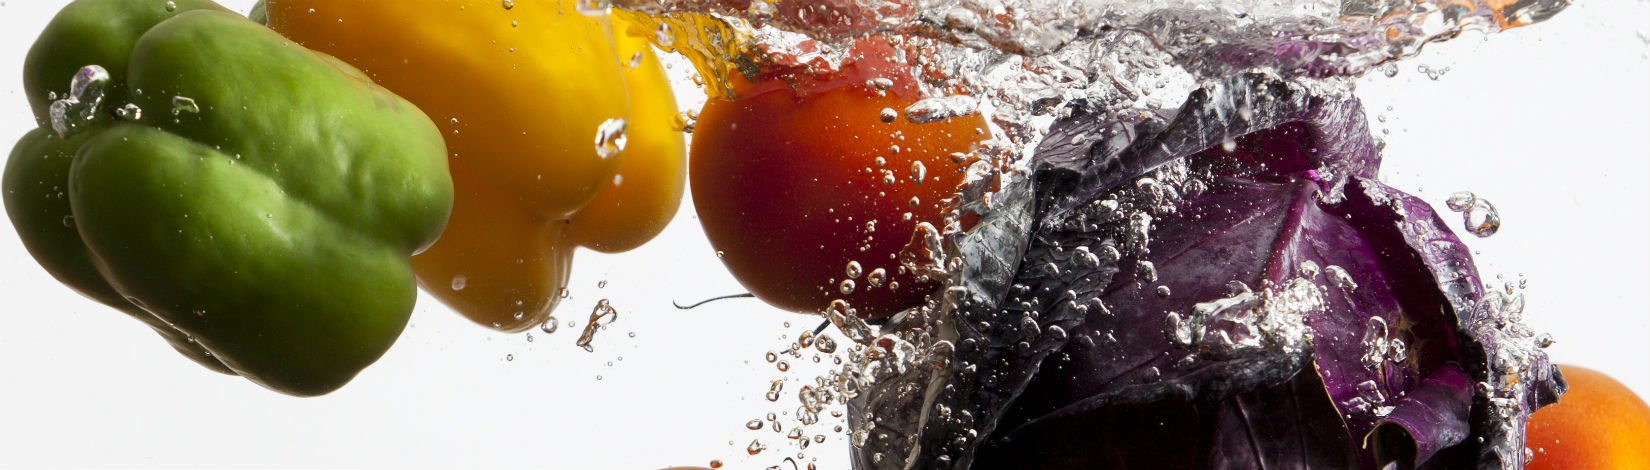 Two bell peppers, a tomato, and a red cabbage splash into a clear tank of water. 